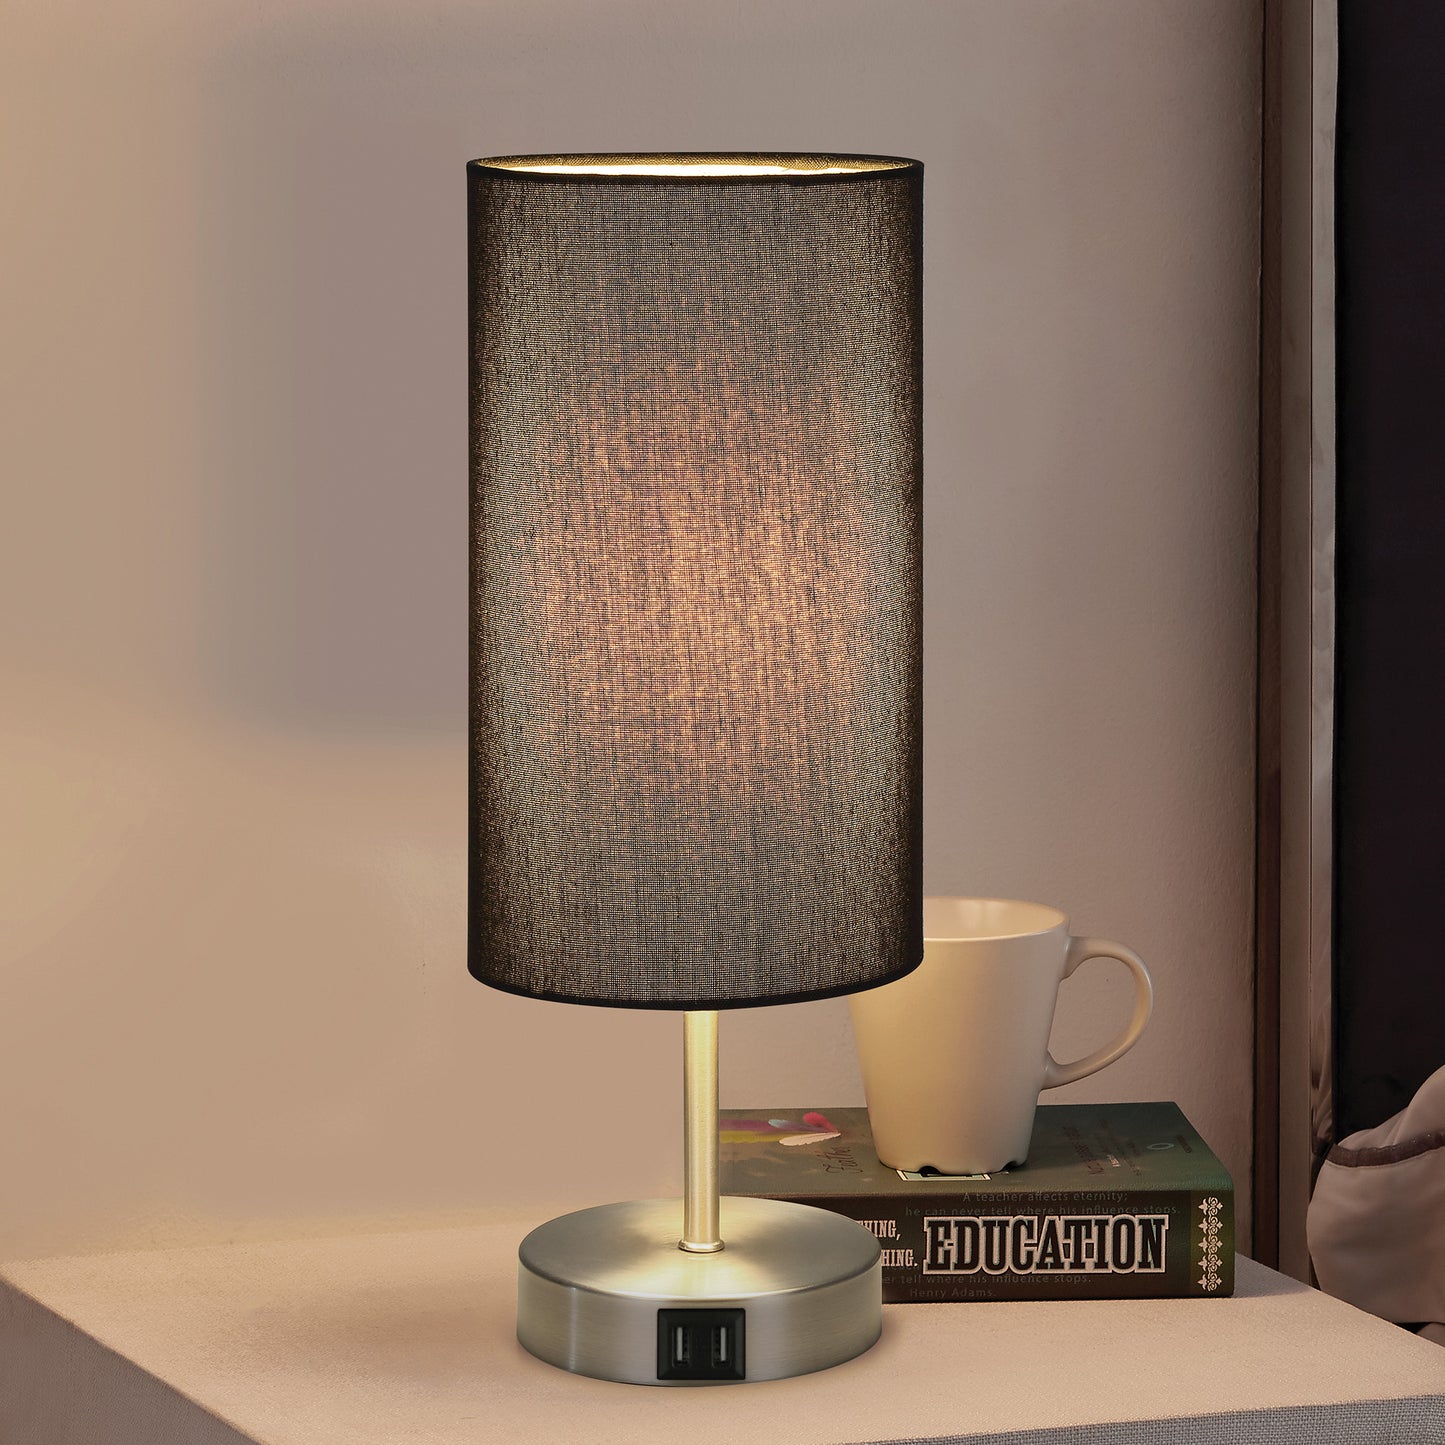 Touch-Sensitive Table Lamp Elegance, Convenience & Dual USB Charging Ports & Touch-sensitive Dimming Switch